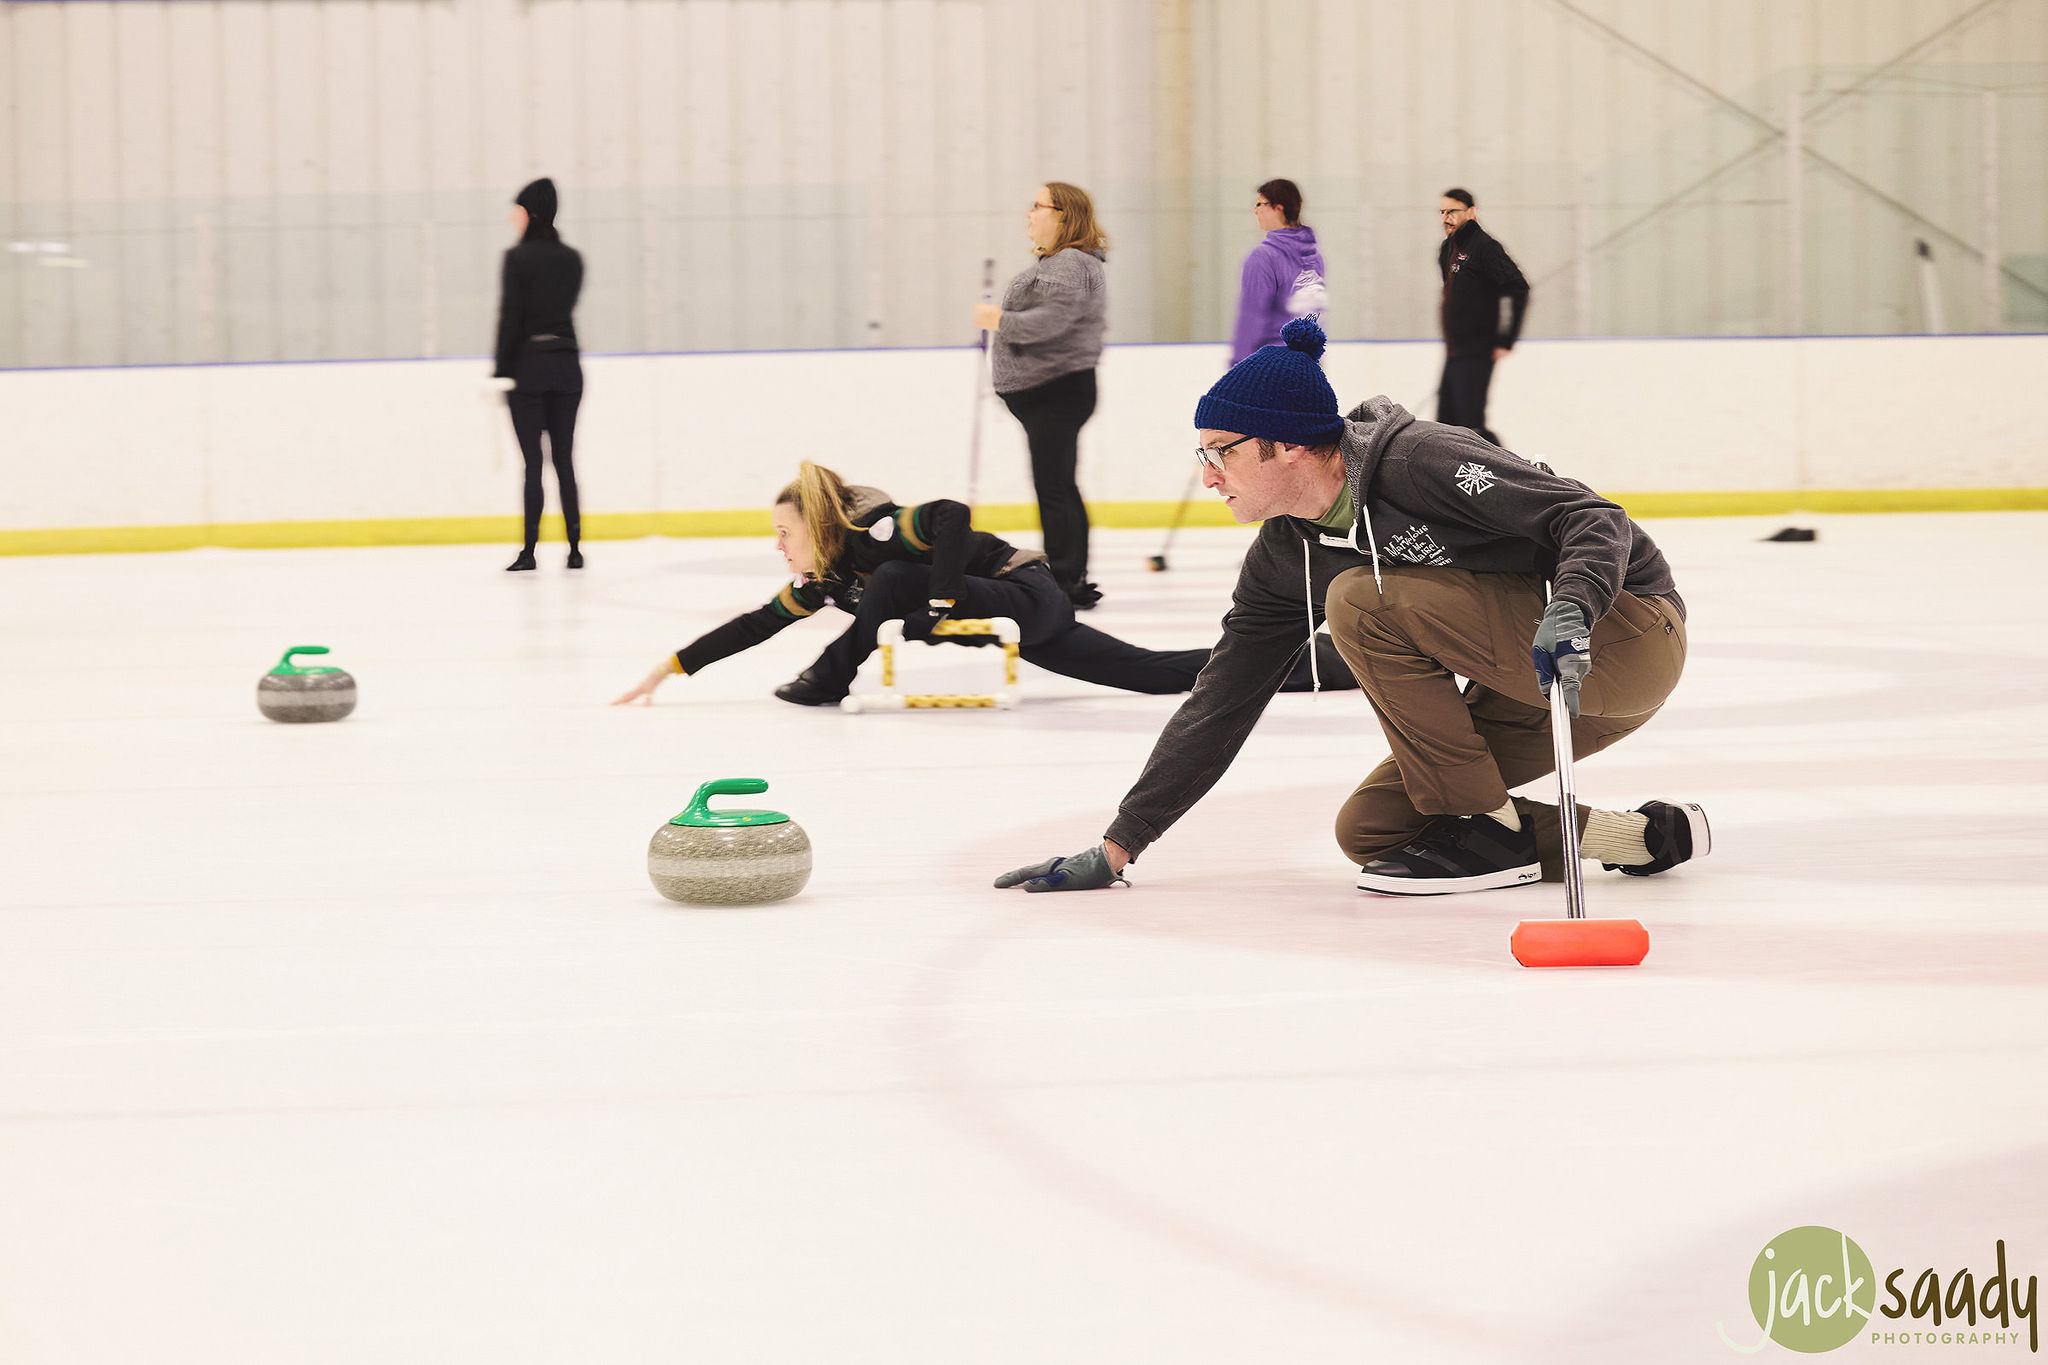 Two Curlers Curling